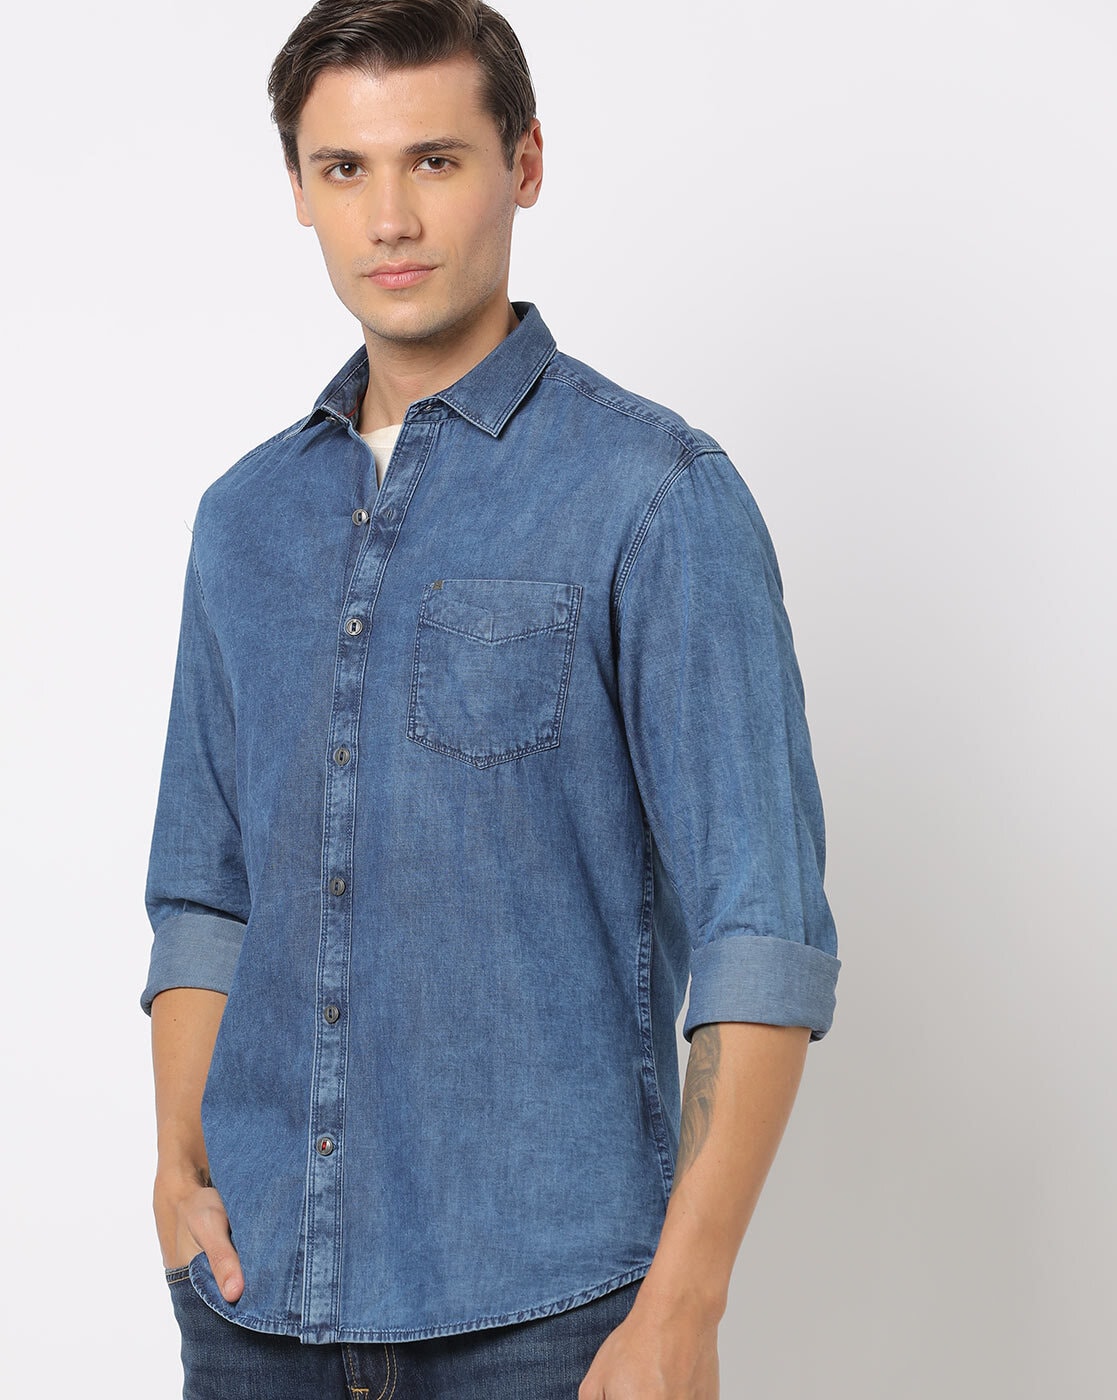 Men Jean Button Shirt - Faded Black Denim Shirt Manufacturers, Size: Small,  Medium, Large, XL, All Sizes at Rs 250 in Surat